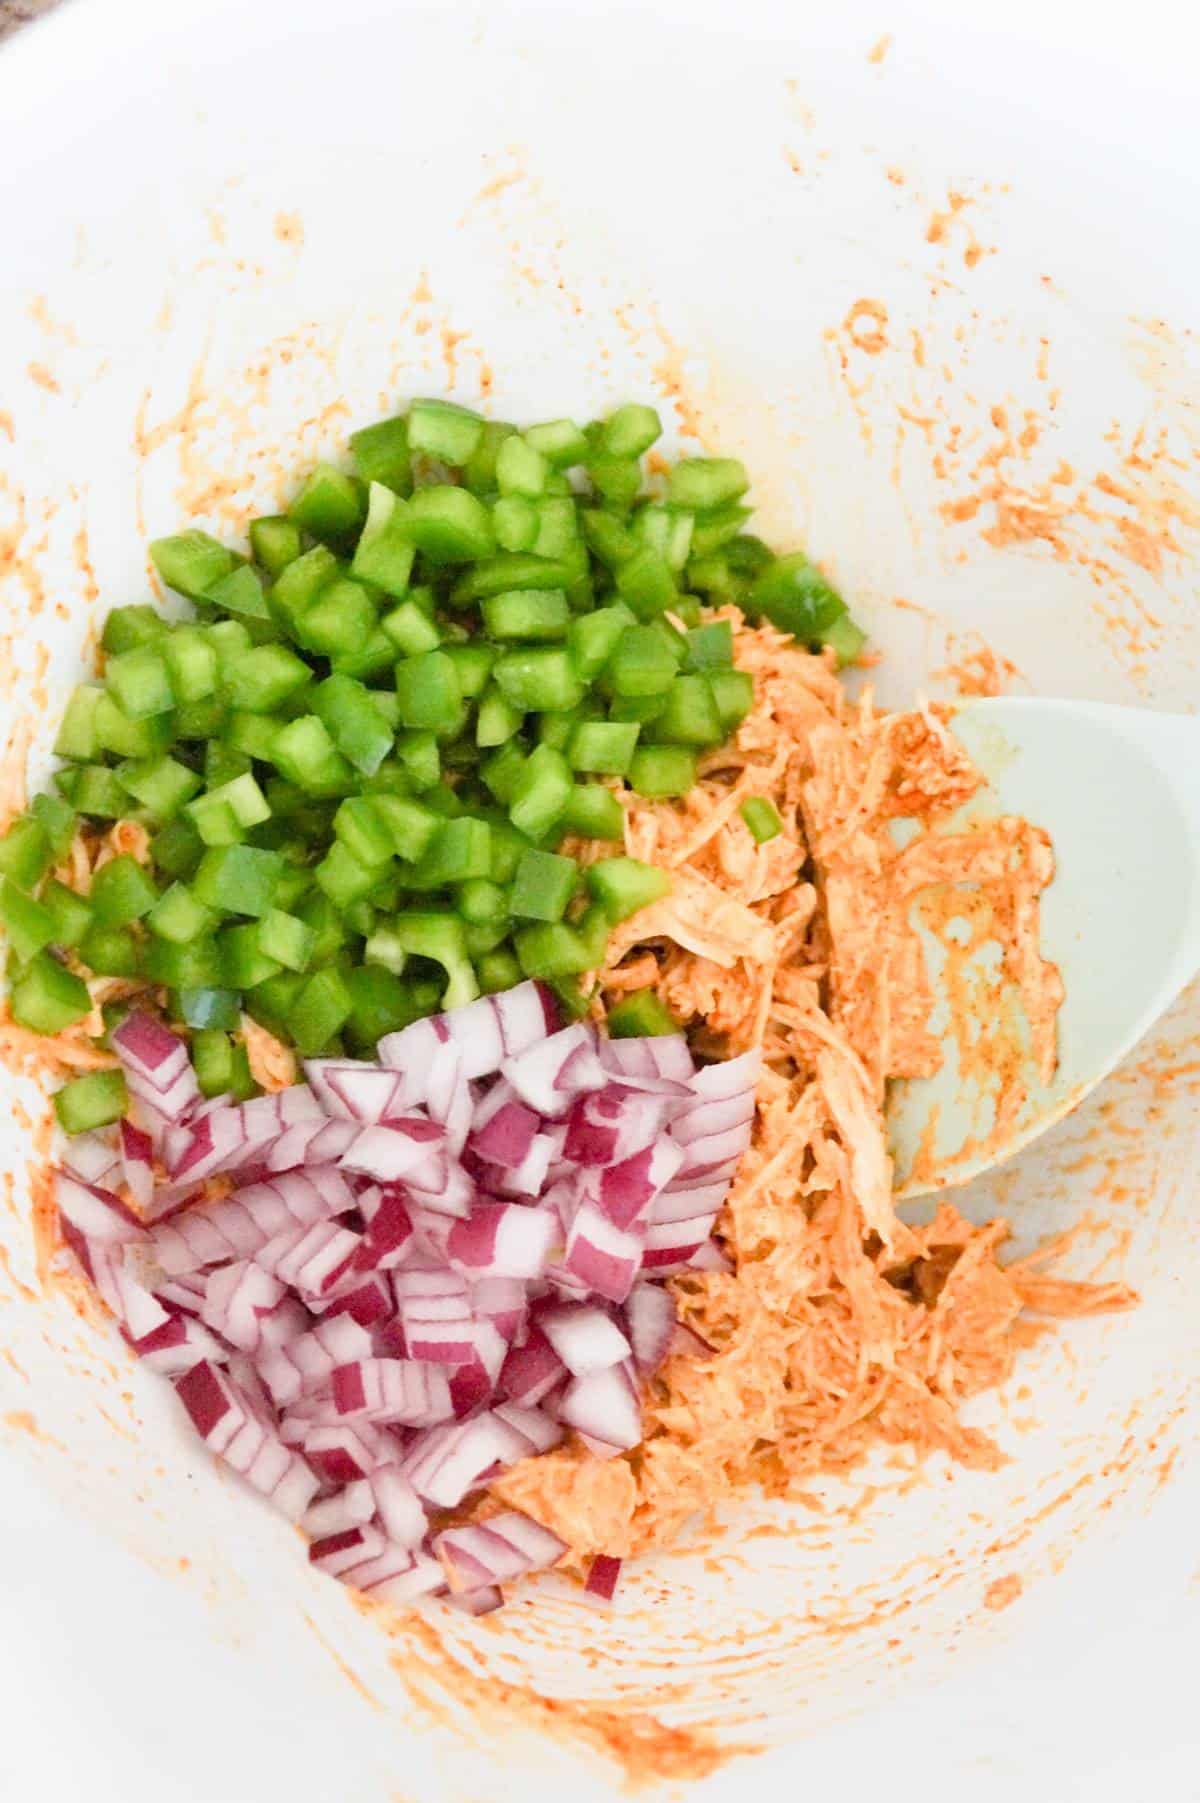 diced green peppers and diced red onions on top of chicken taco mixture in a mixing bowl